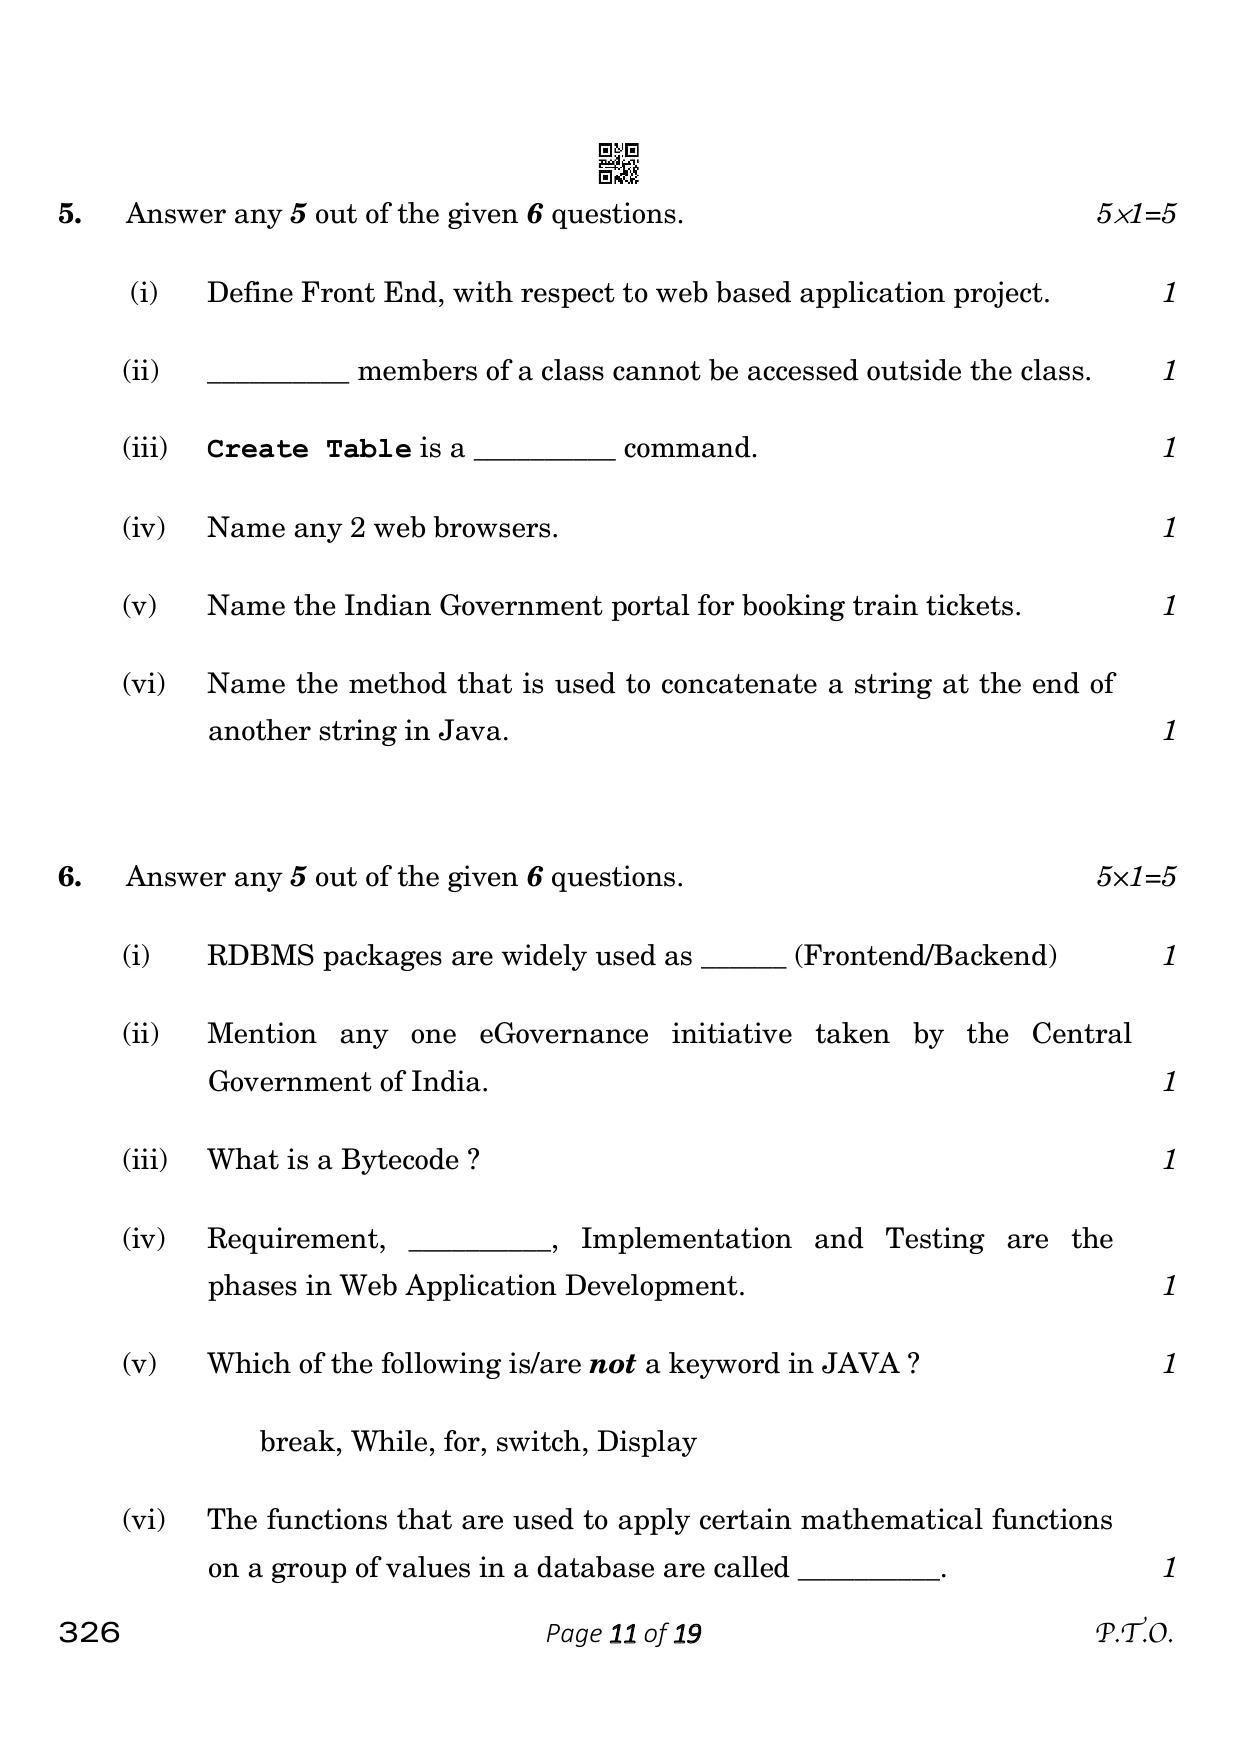 CBSE Class 12 326_Information Technology 2023 Question Paper - Page 11